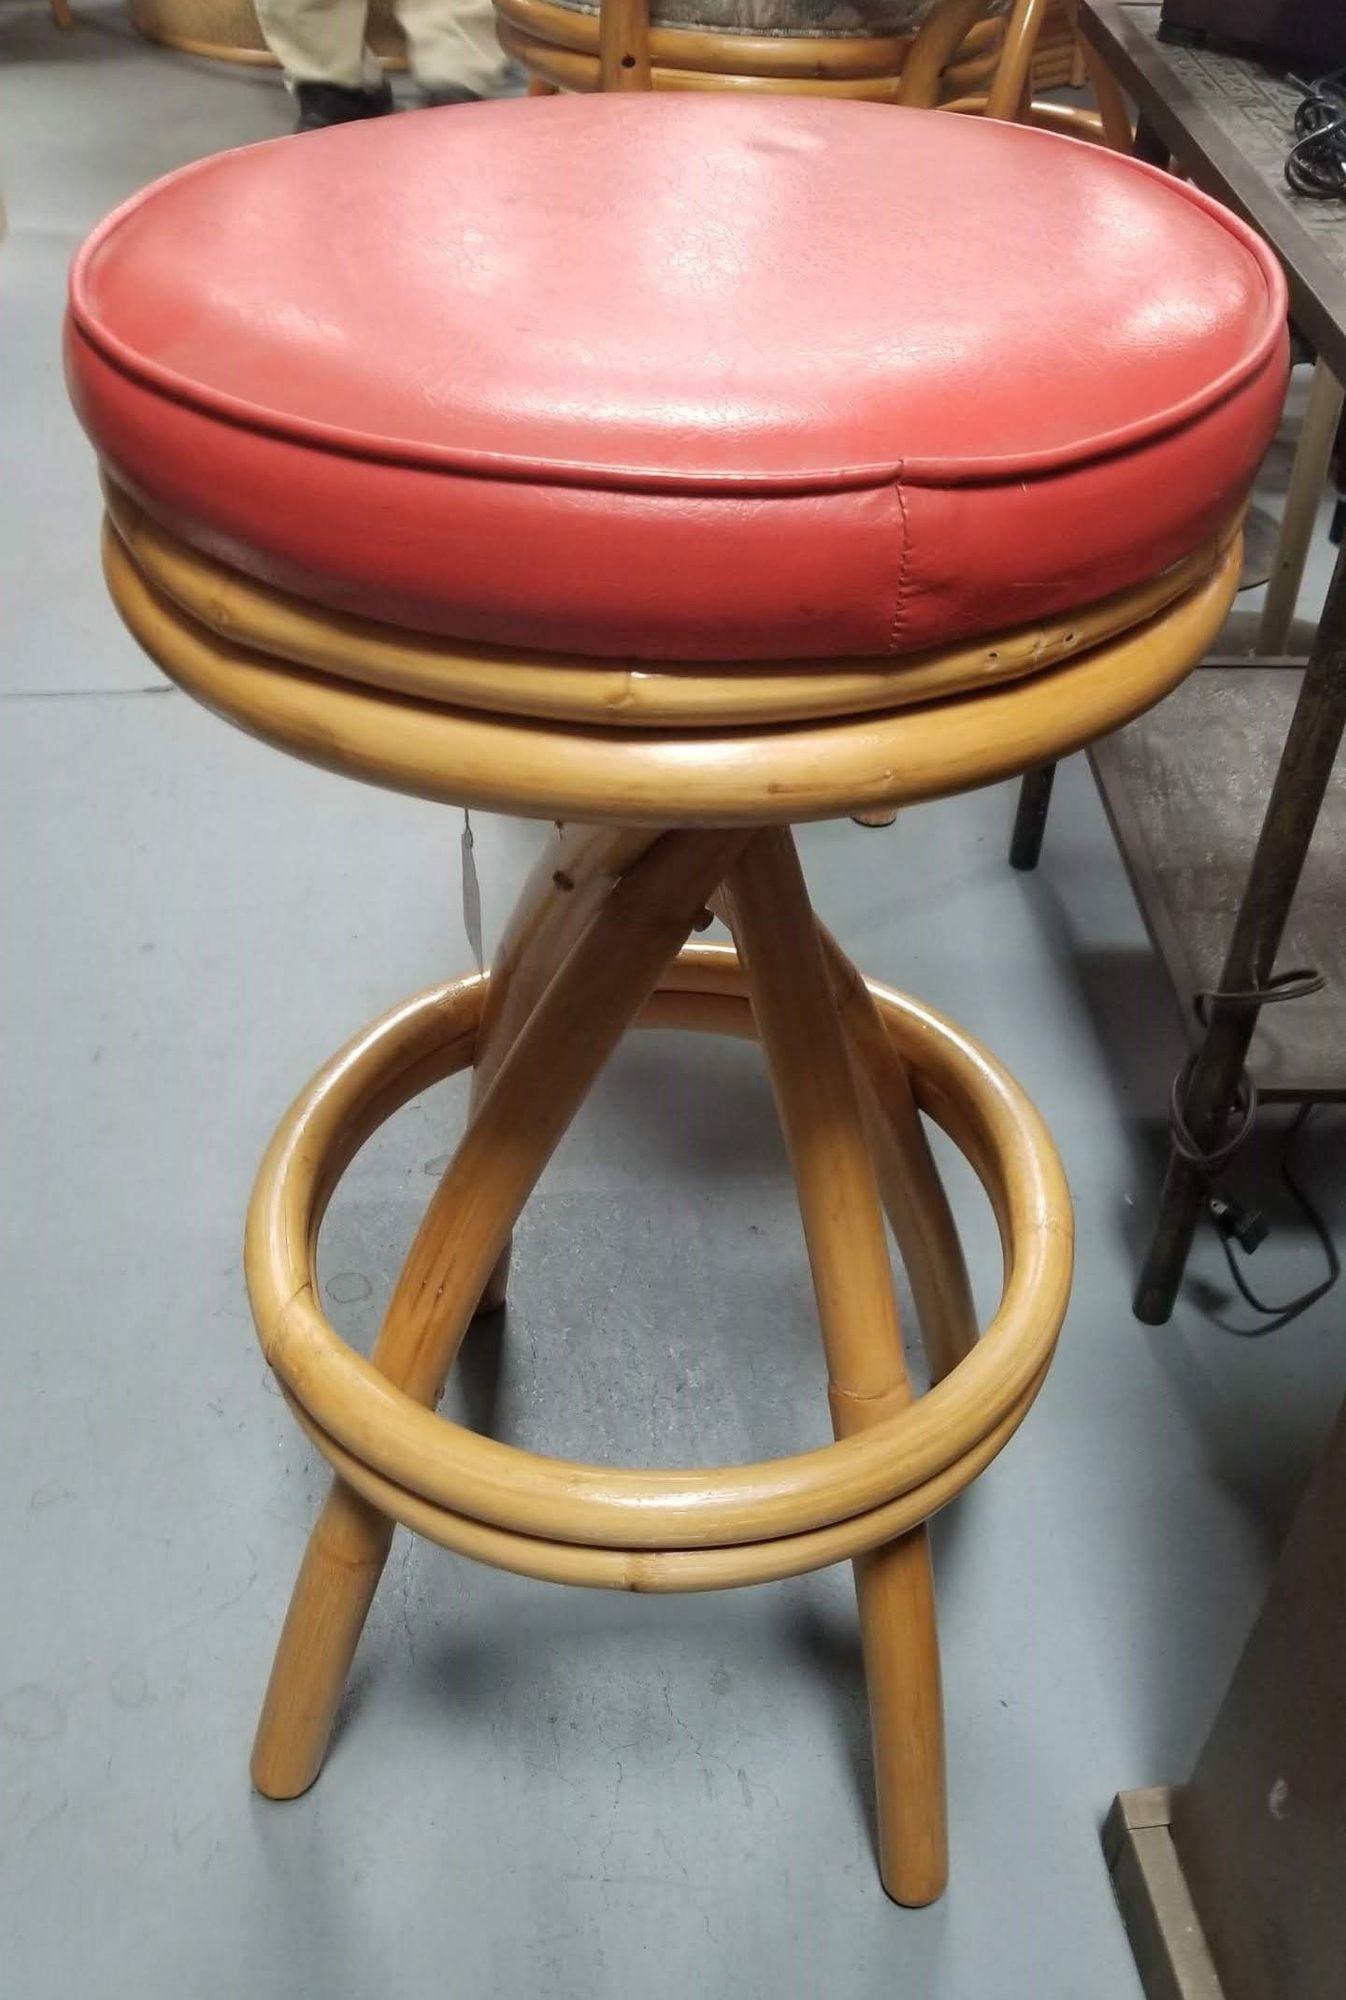 Restored single-stand spiral leg bar stools with a double stacked bottom footrest and swivel red seats.

Seat Height: 30